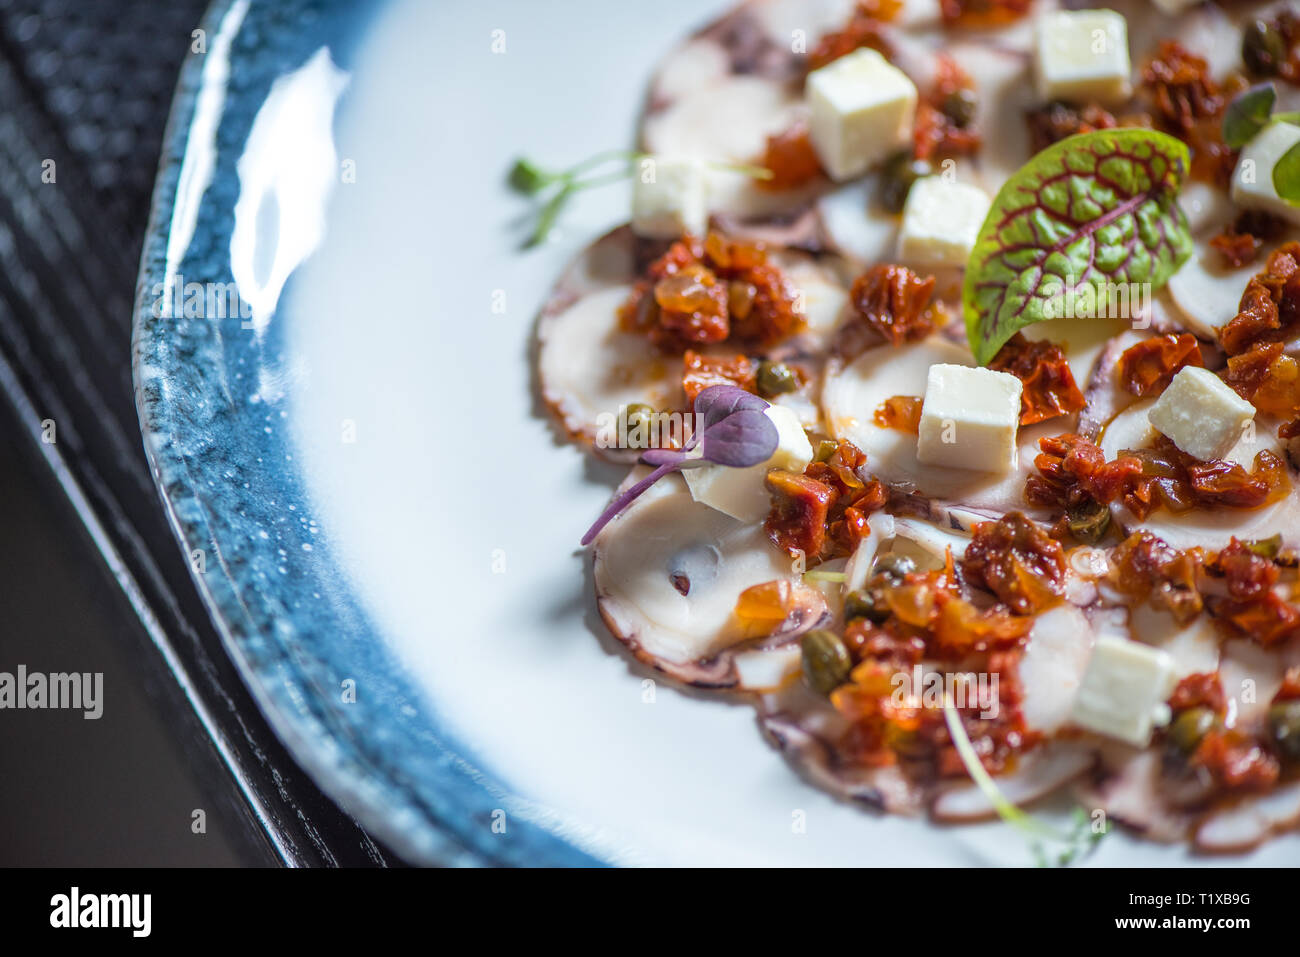 Carpaccio of octopus on blue plate Stock Photo